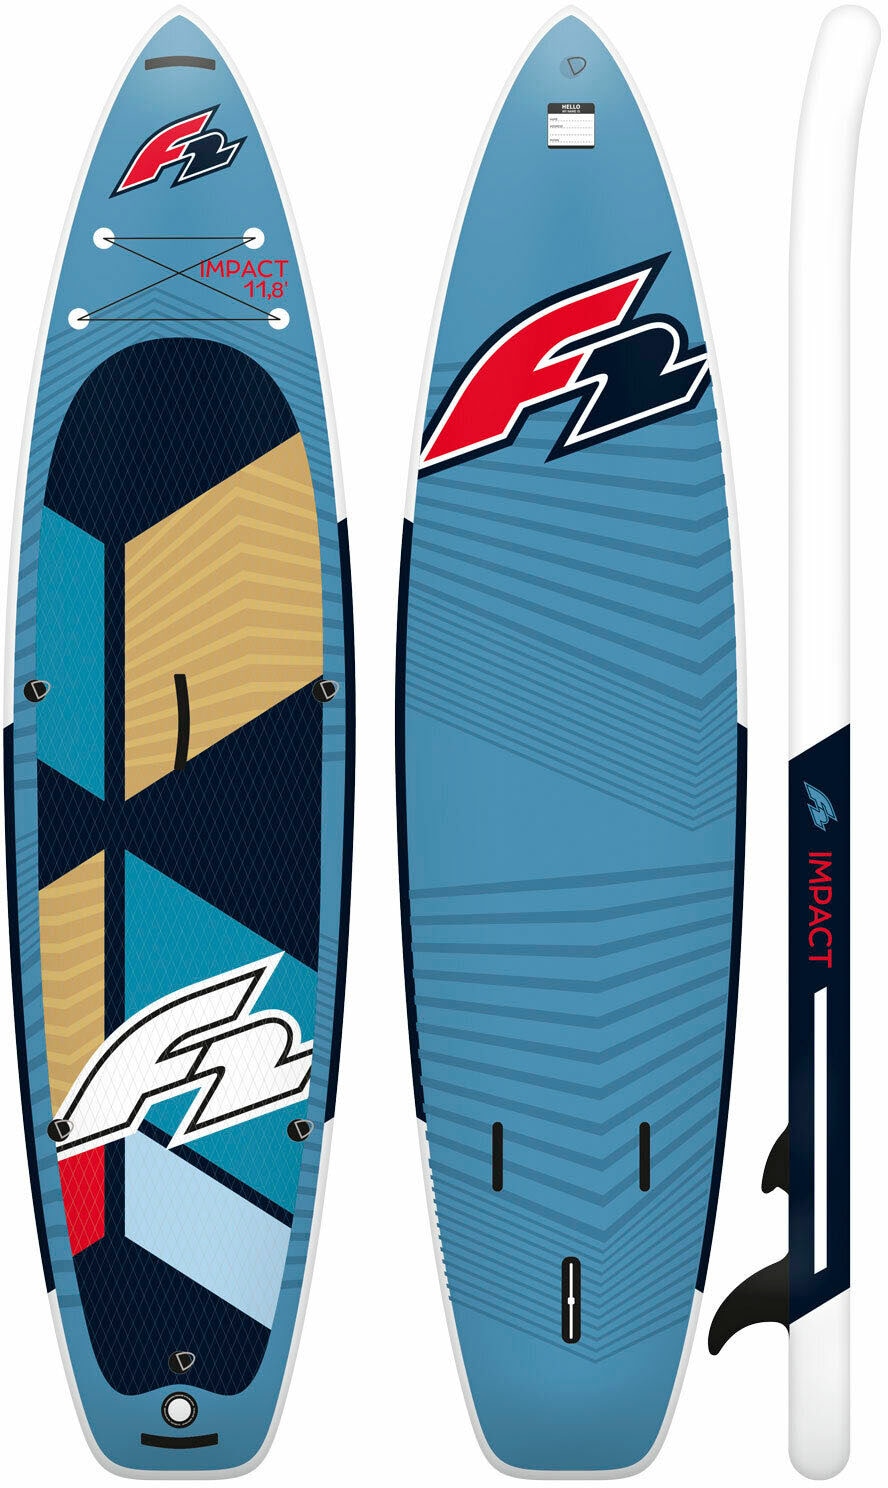 turquoise Shop (Packung, tlg.) OTTO SUP-Board 10,8«, Inflatable »Impact im Online 5 F2